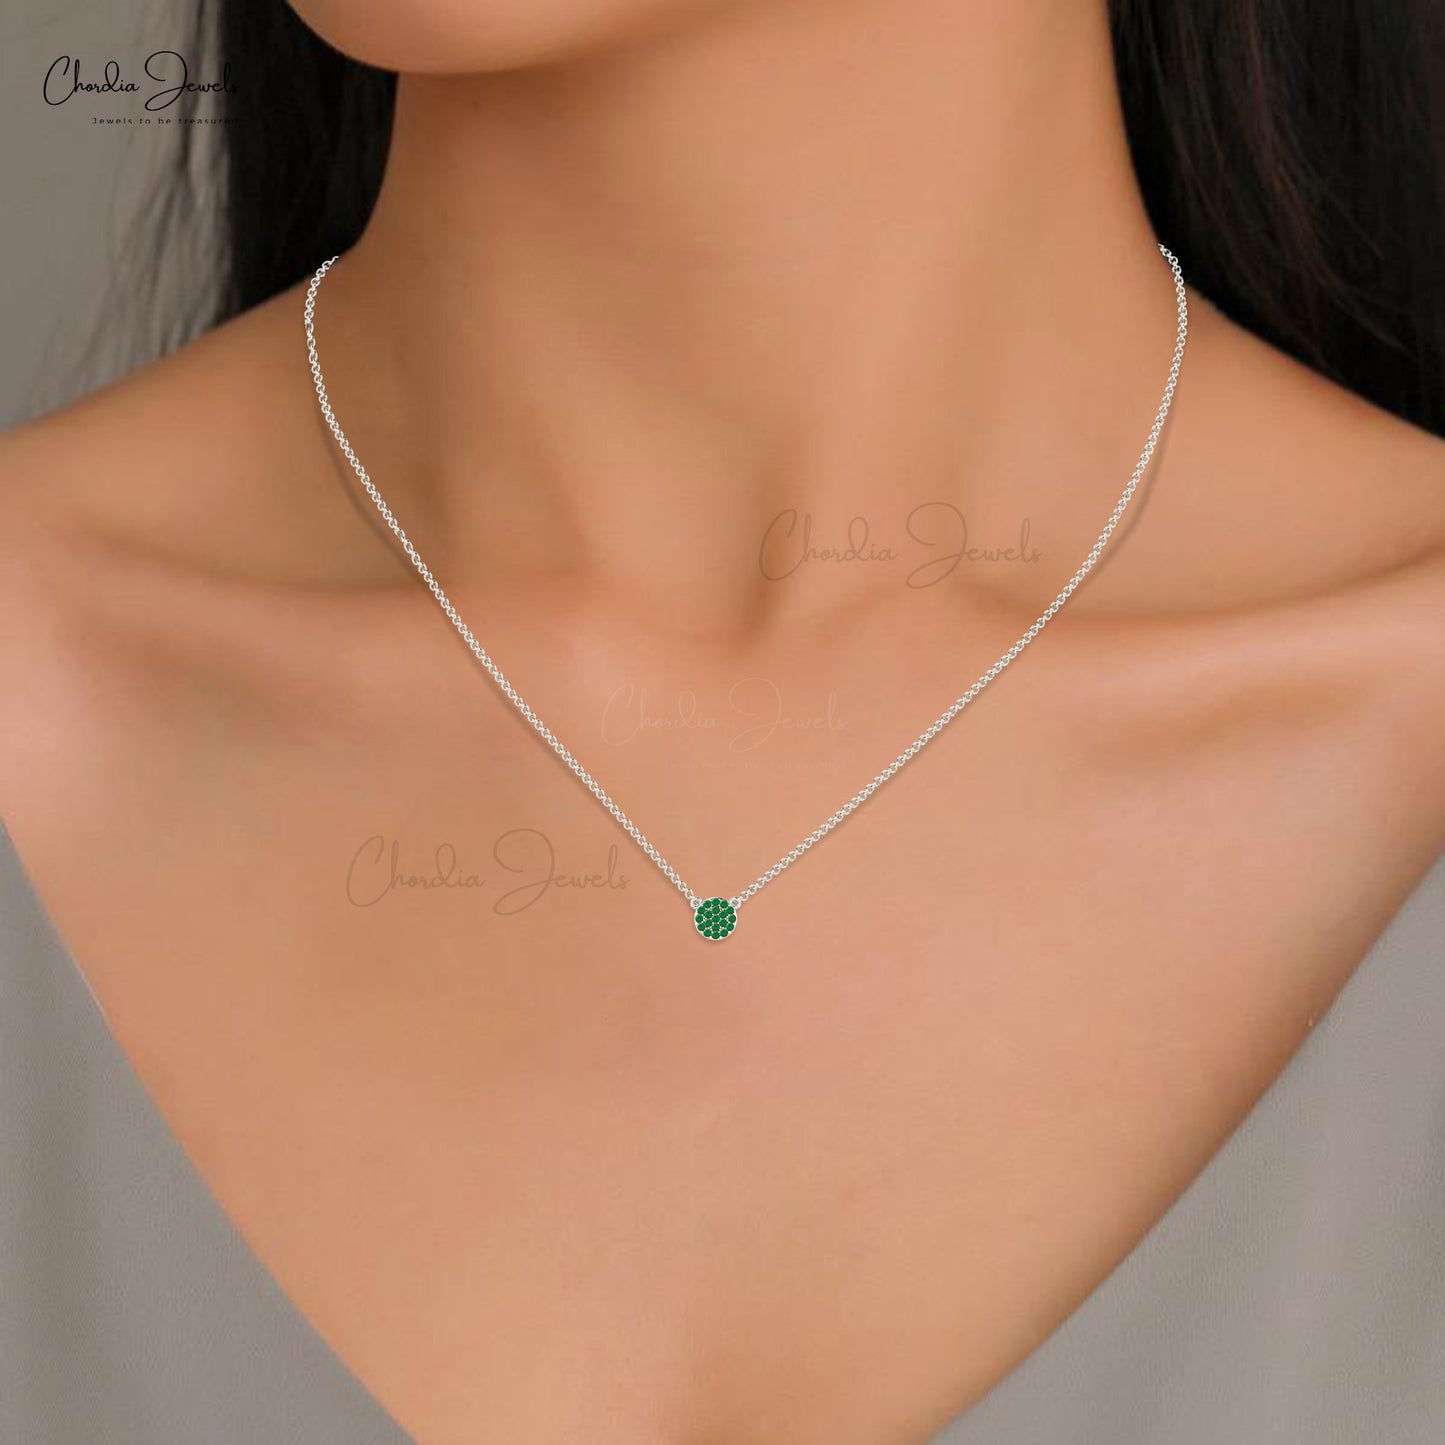 Delicate Round Emerald Dainty Necklace Pendant in 14k Real Gold May Birthstone Natural Gemstone Cluster Necklace For Bridesmaid Gift